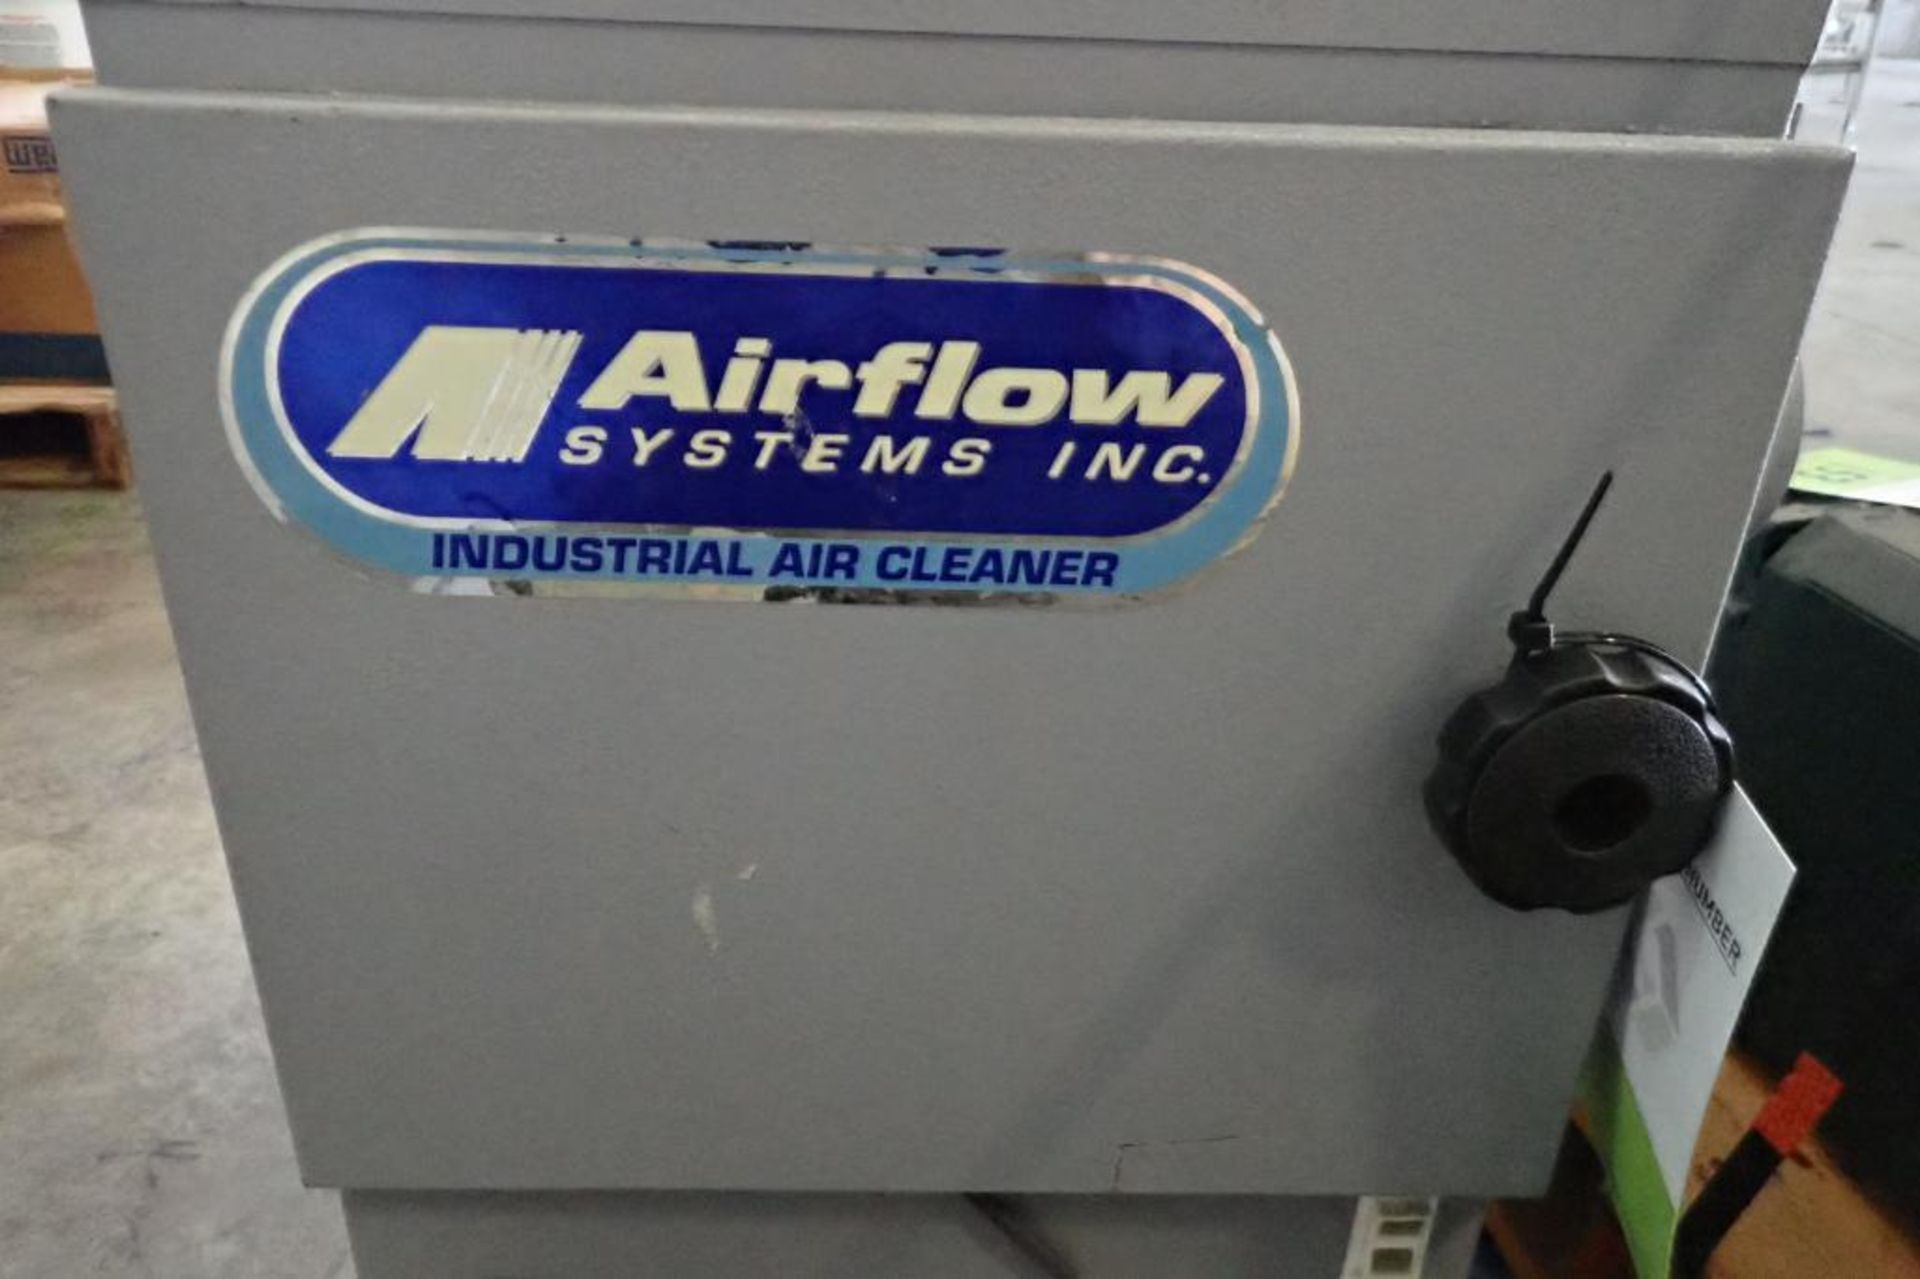 Airflow systems industrial air cleaner { Rigging Fee: $25} - Image 3 of 12